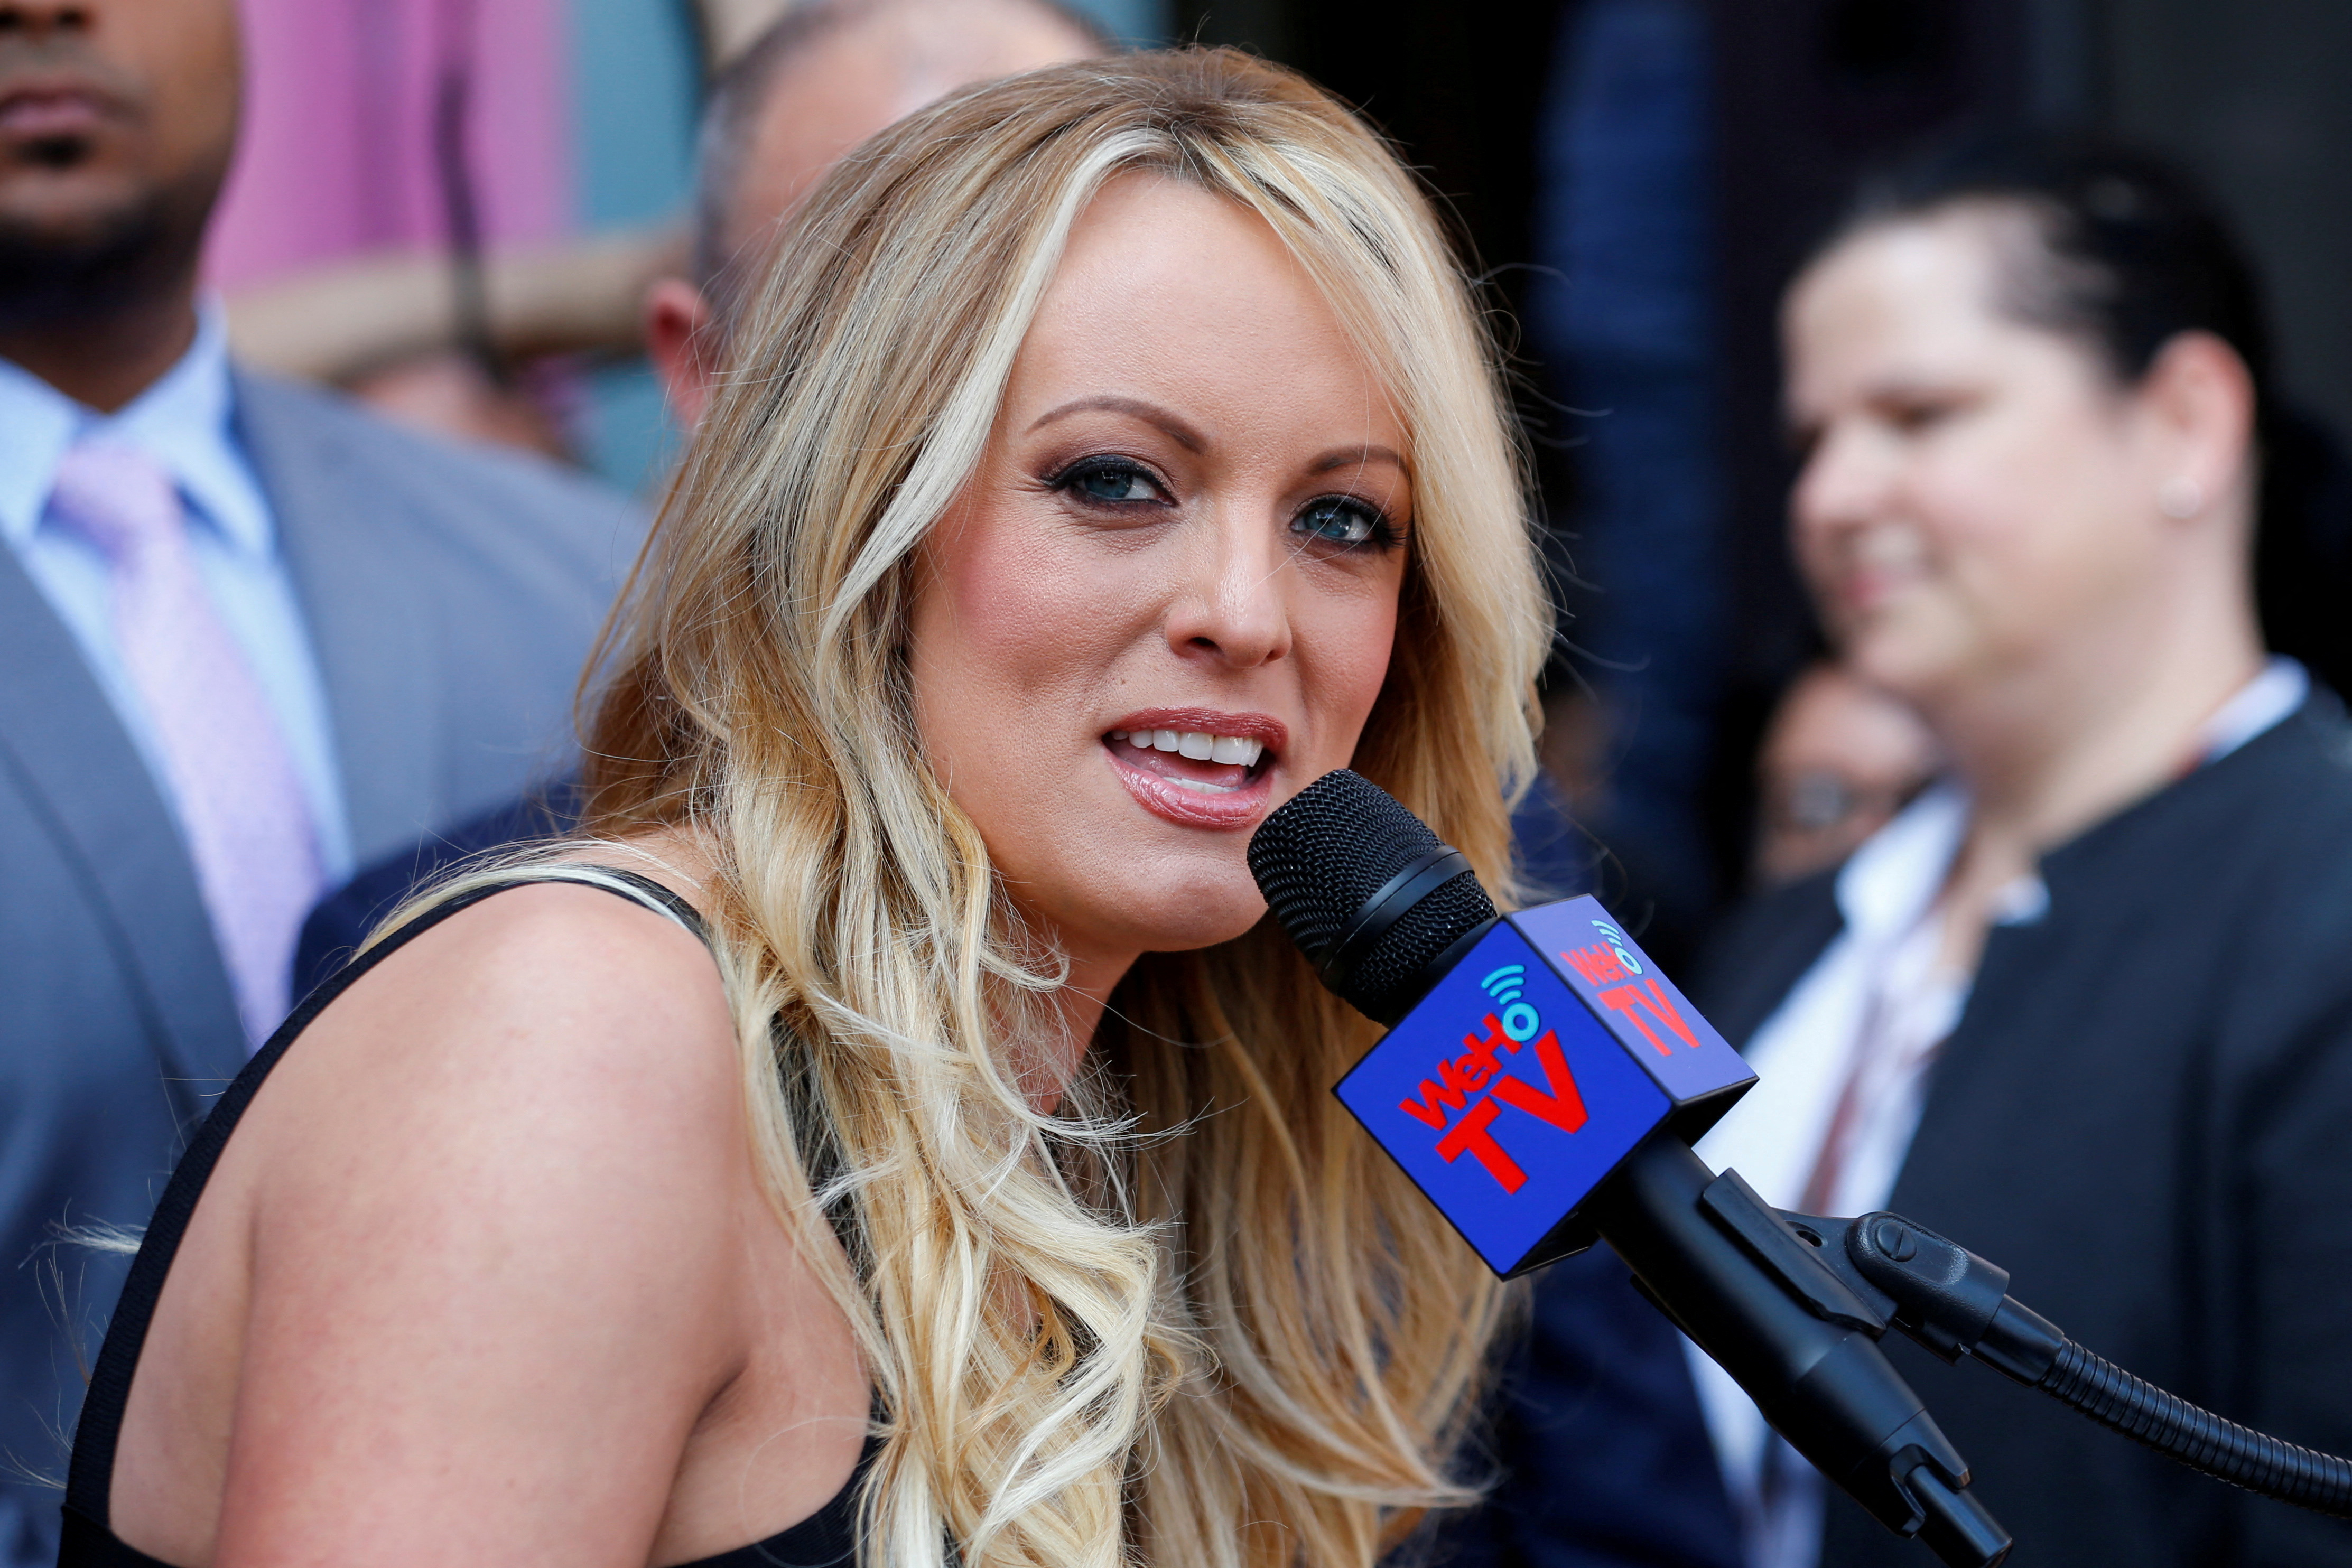 Who is Stormy Daniels and how is she involved in the Donald Trump indictment? Reuters photo